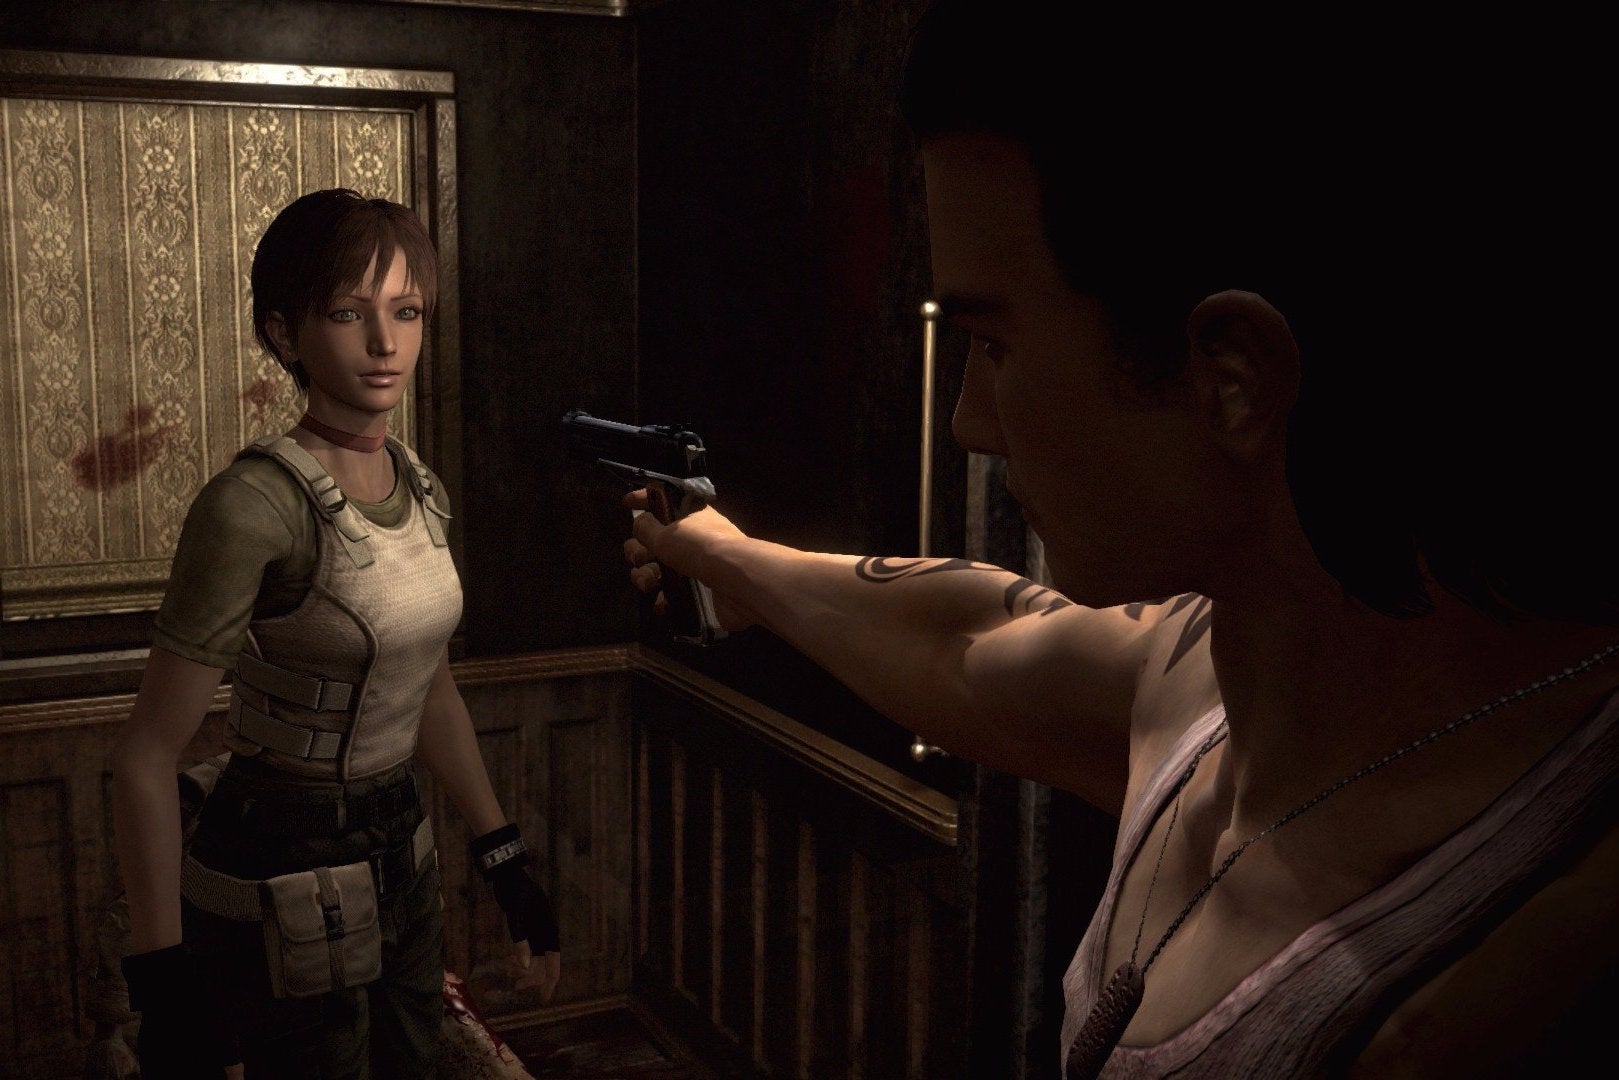 Image for Resident Evil 0, from N64 prototype to GameCube original to HD Remaster